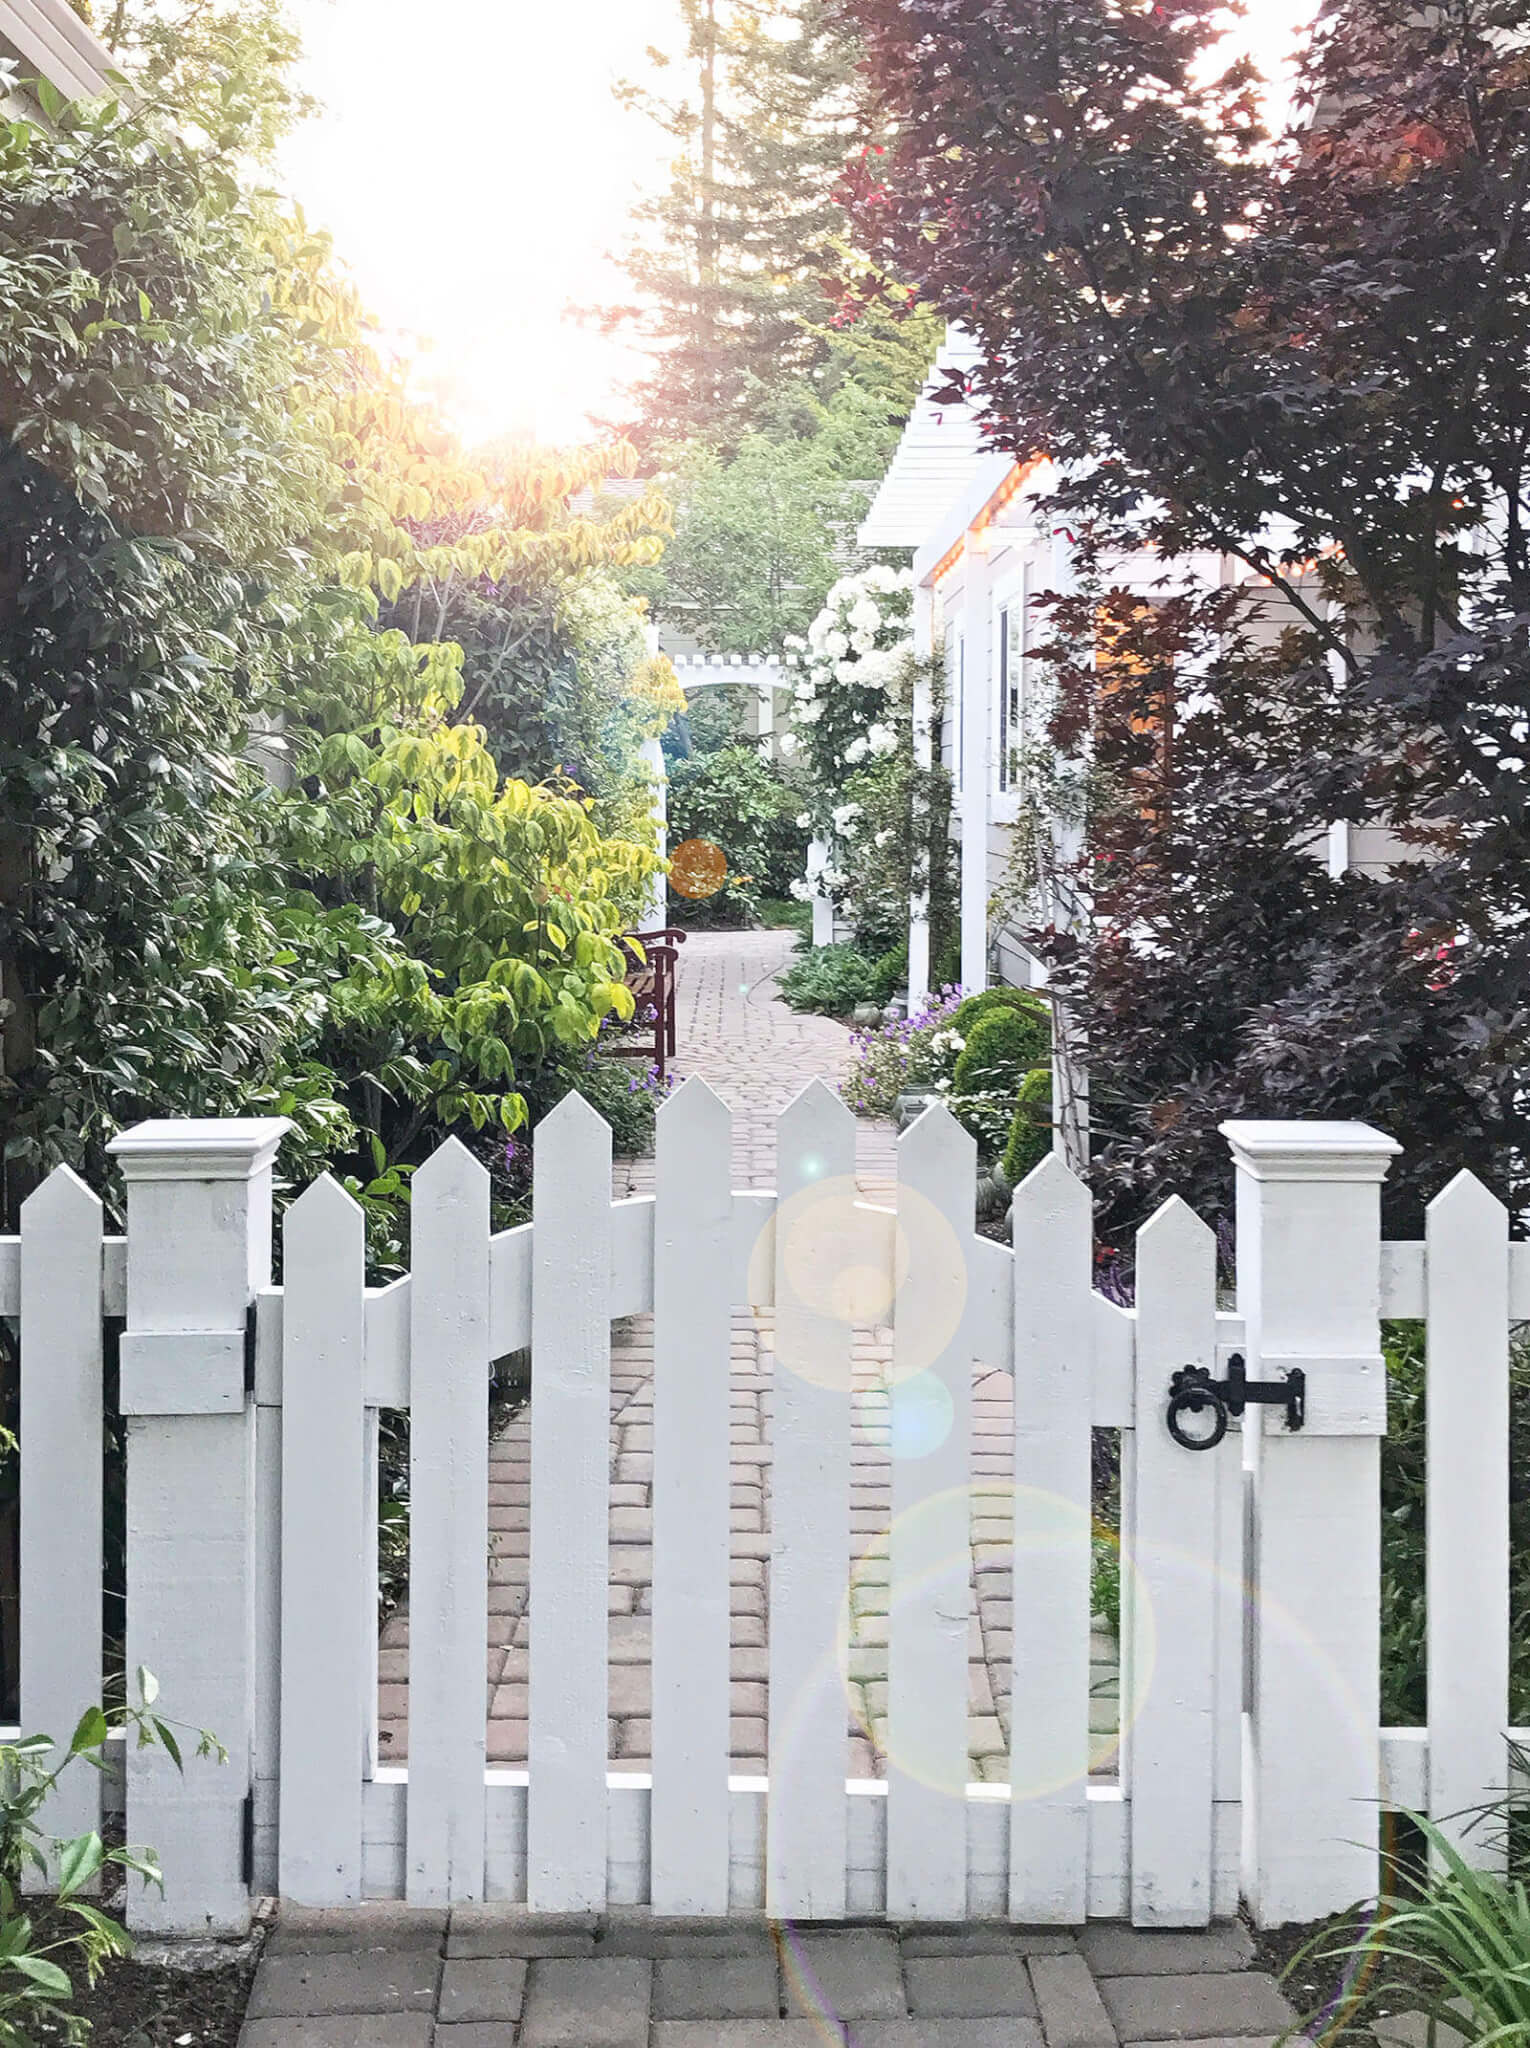 White picket fence gate with wrought iron latch, leading to brick path going to side yard